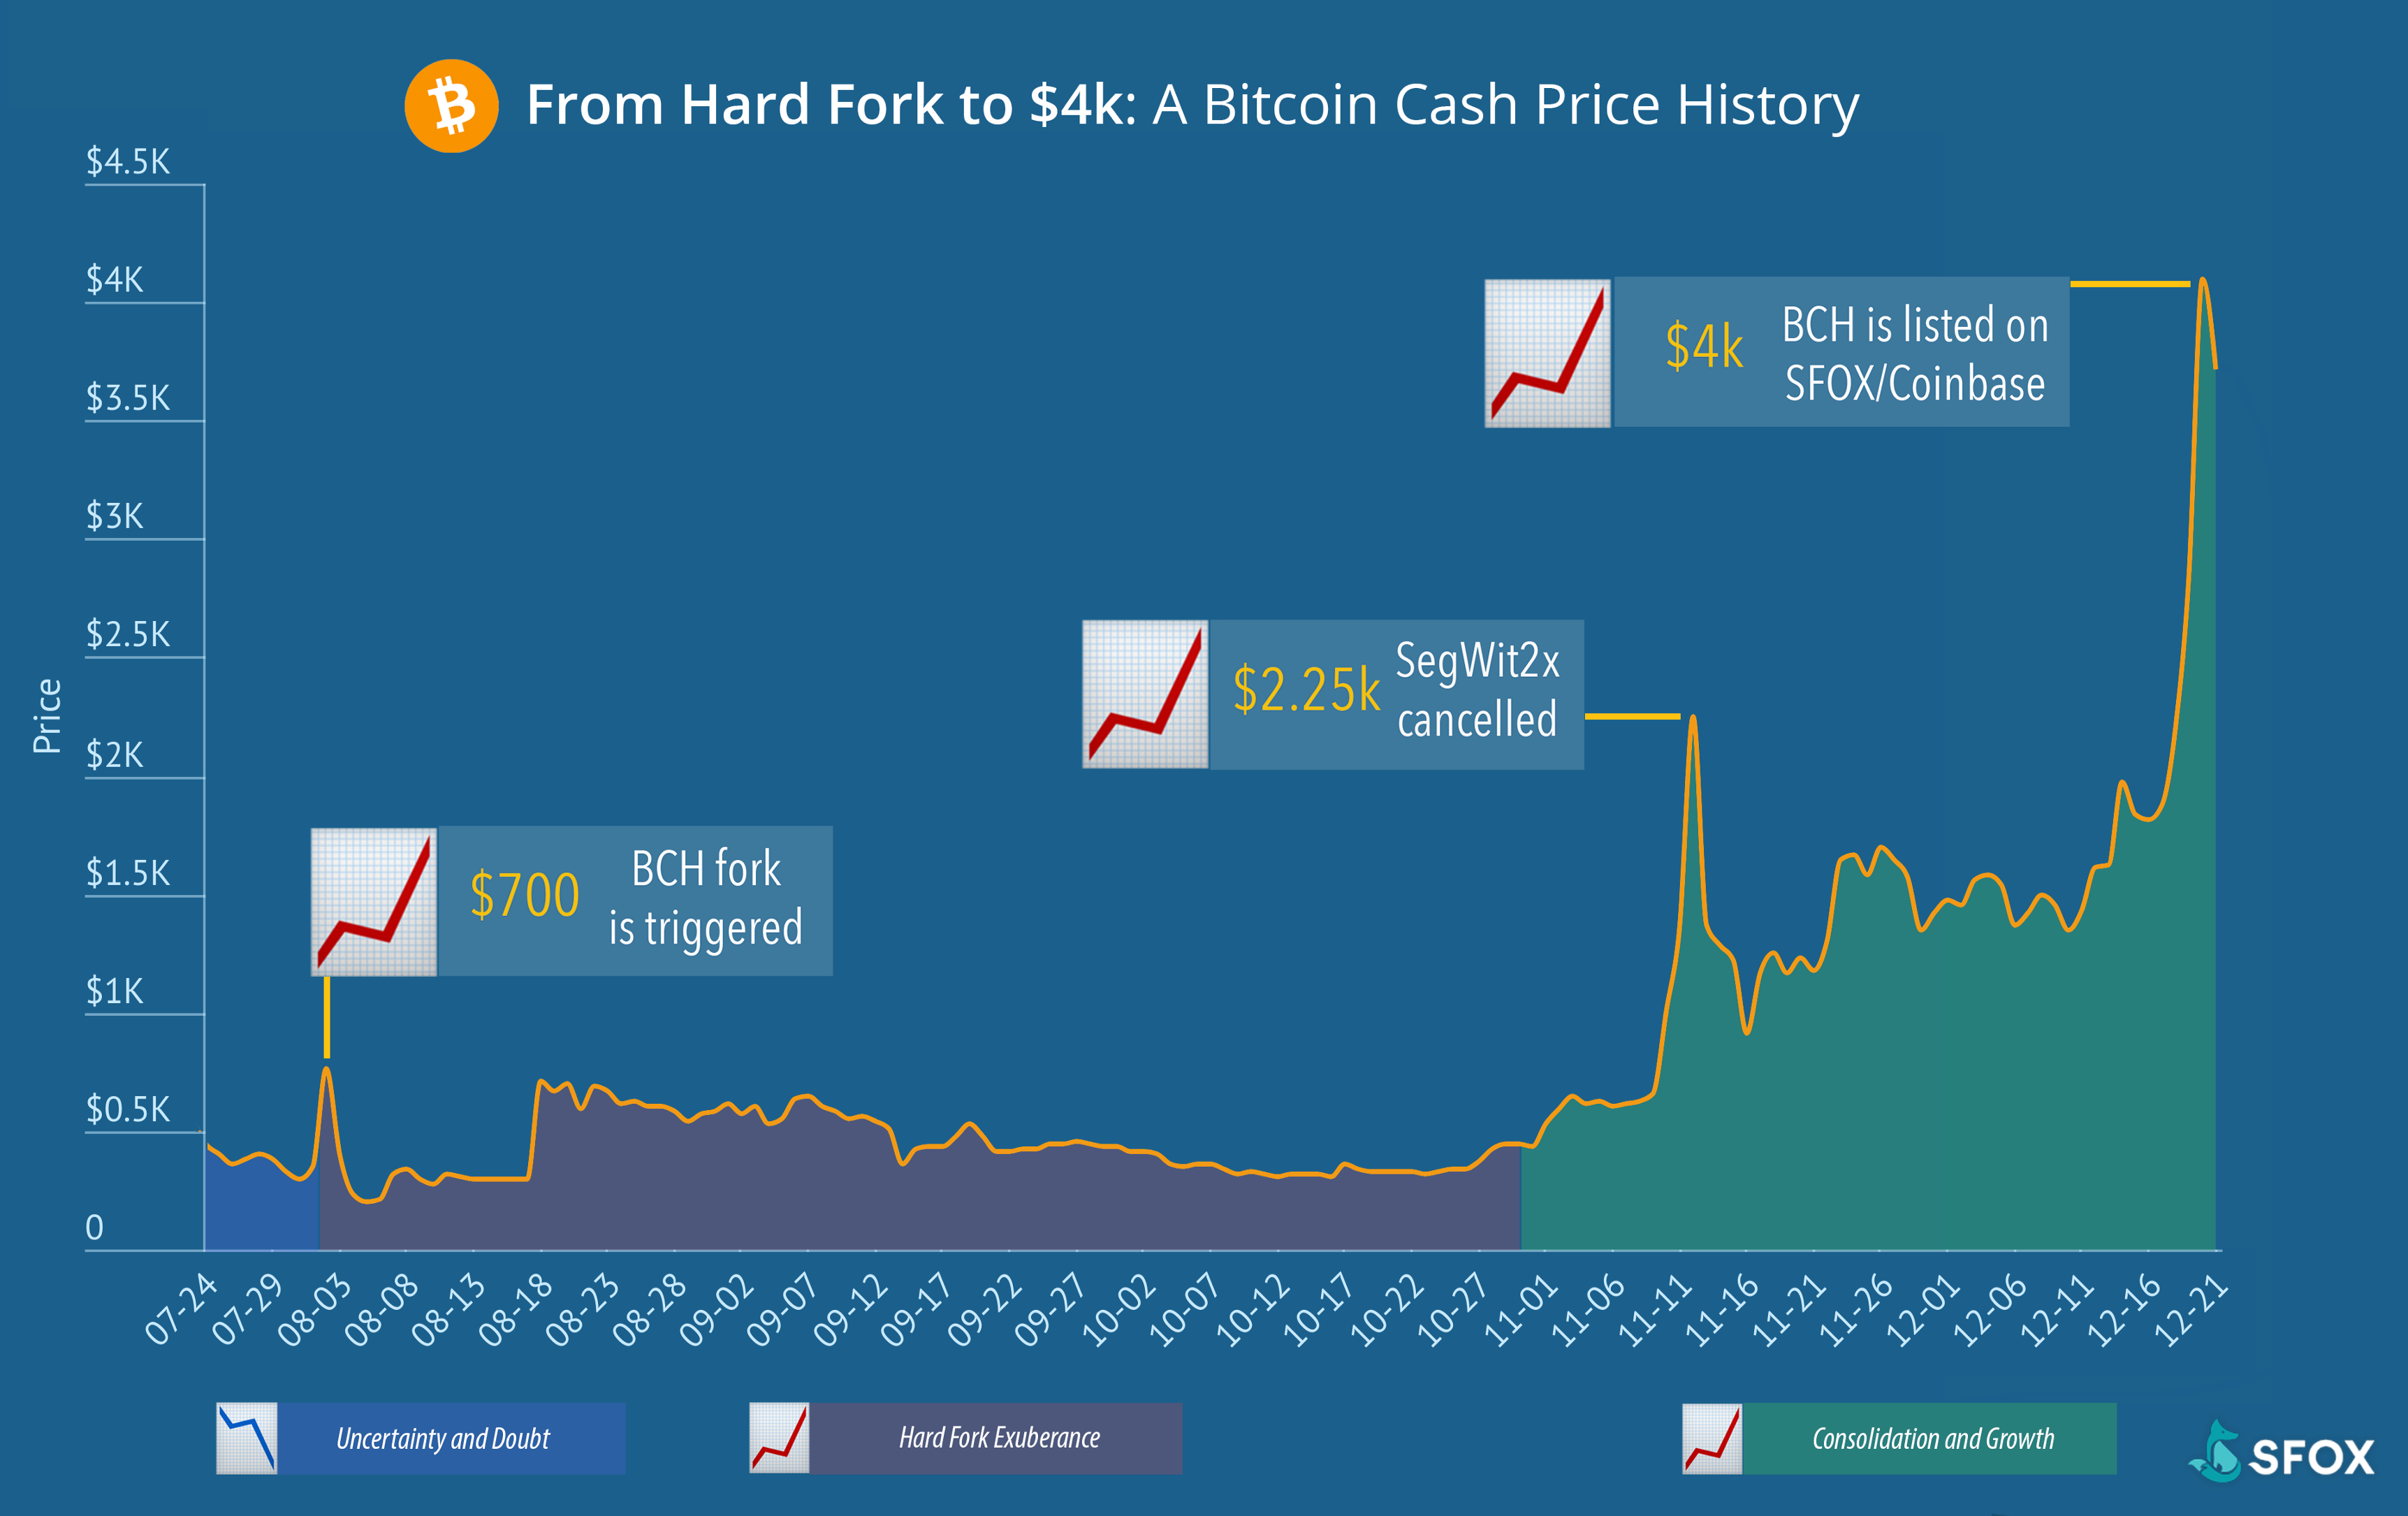 what is the current value of bitcoin cash